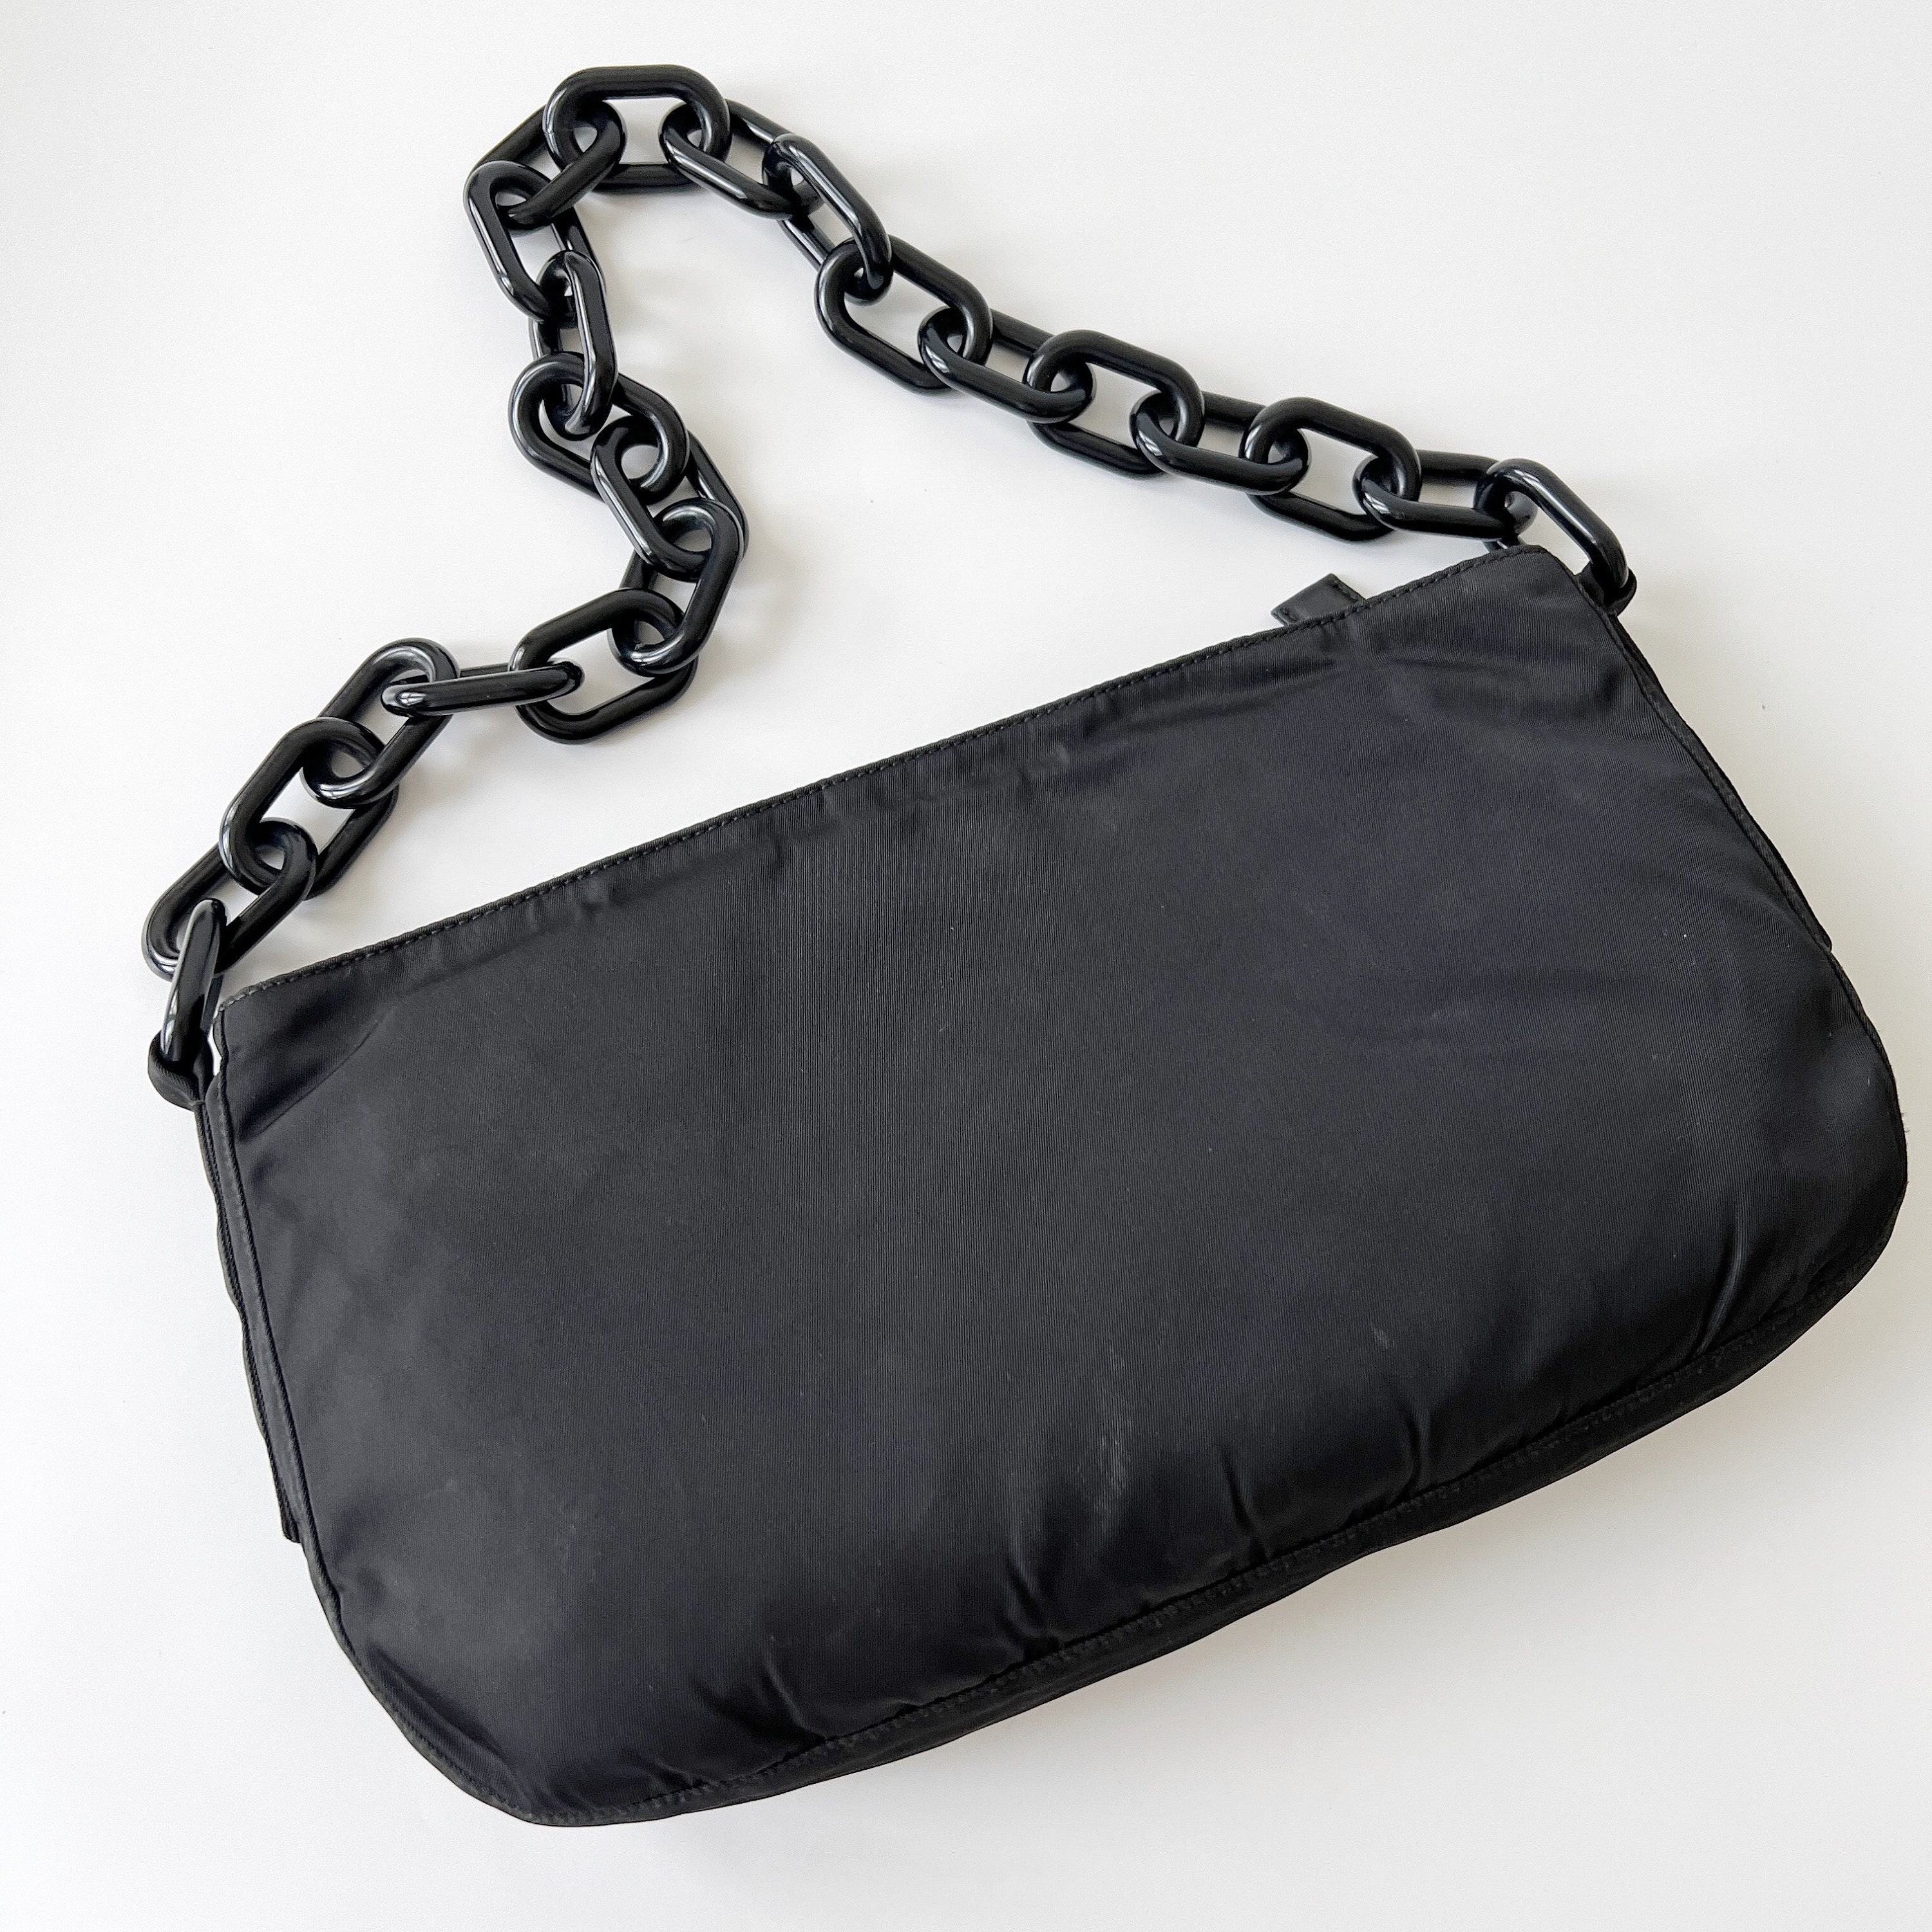 Vintage Prada Black Leather with Nylon Shoulder Bag With Woven Chain Strap